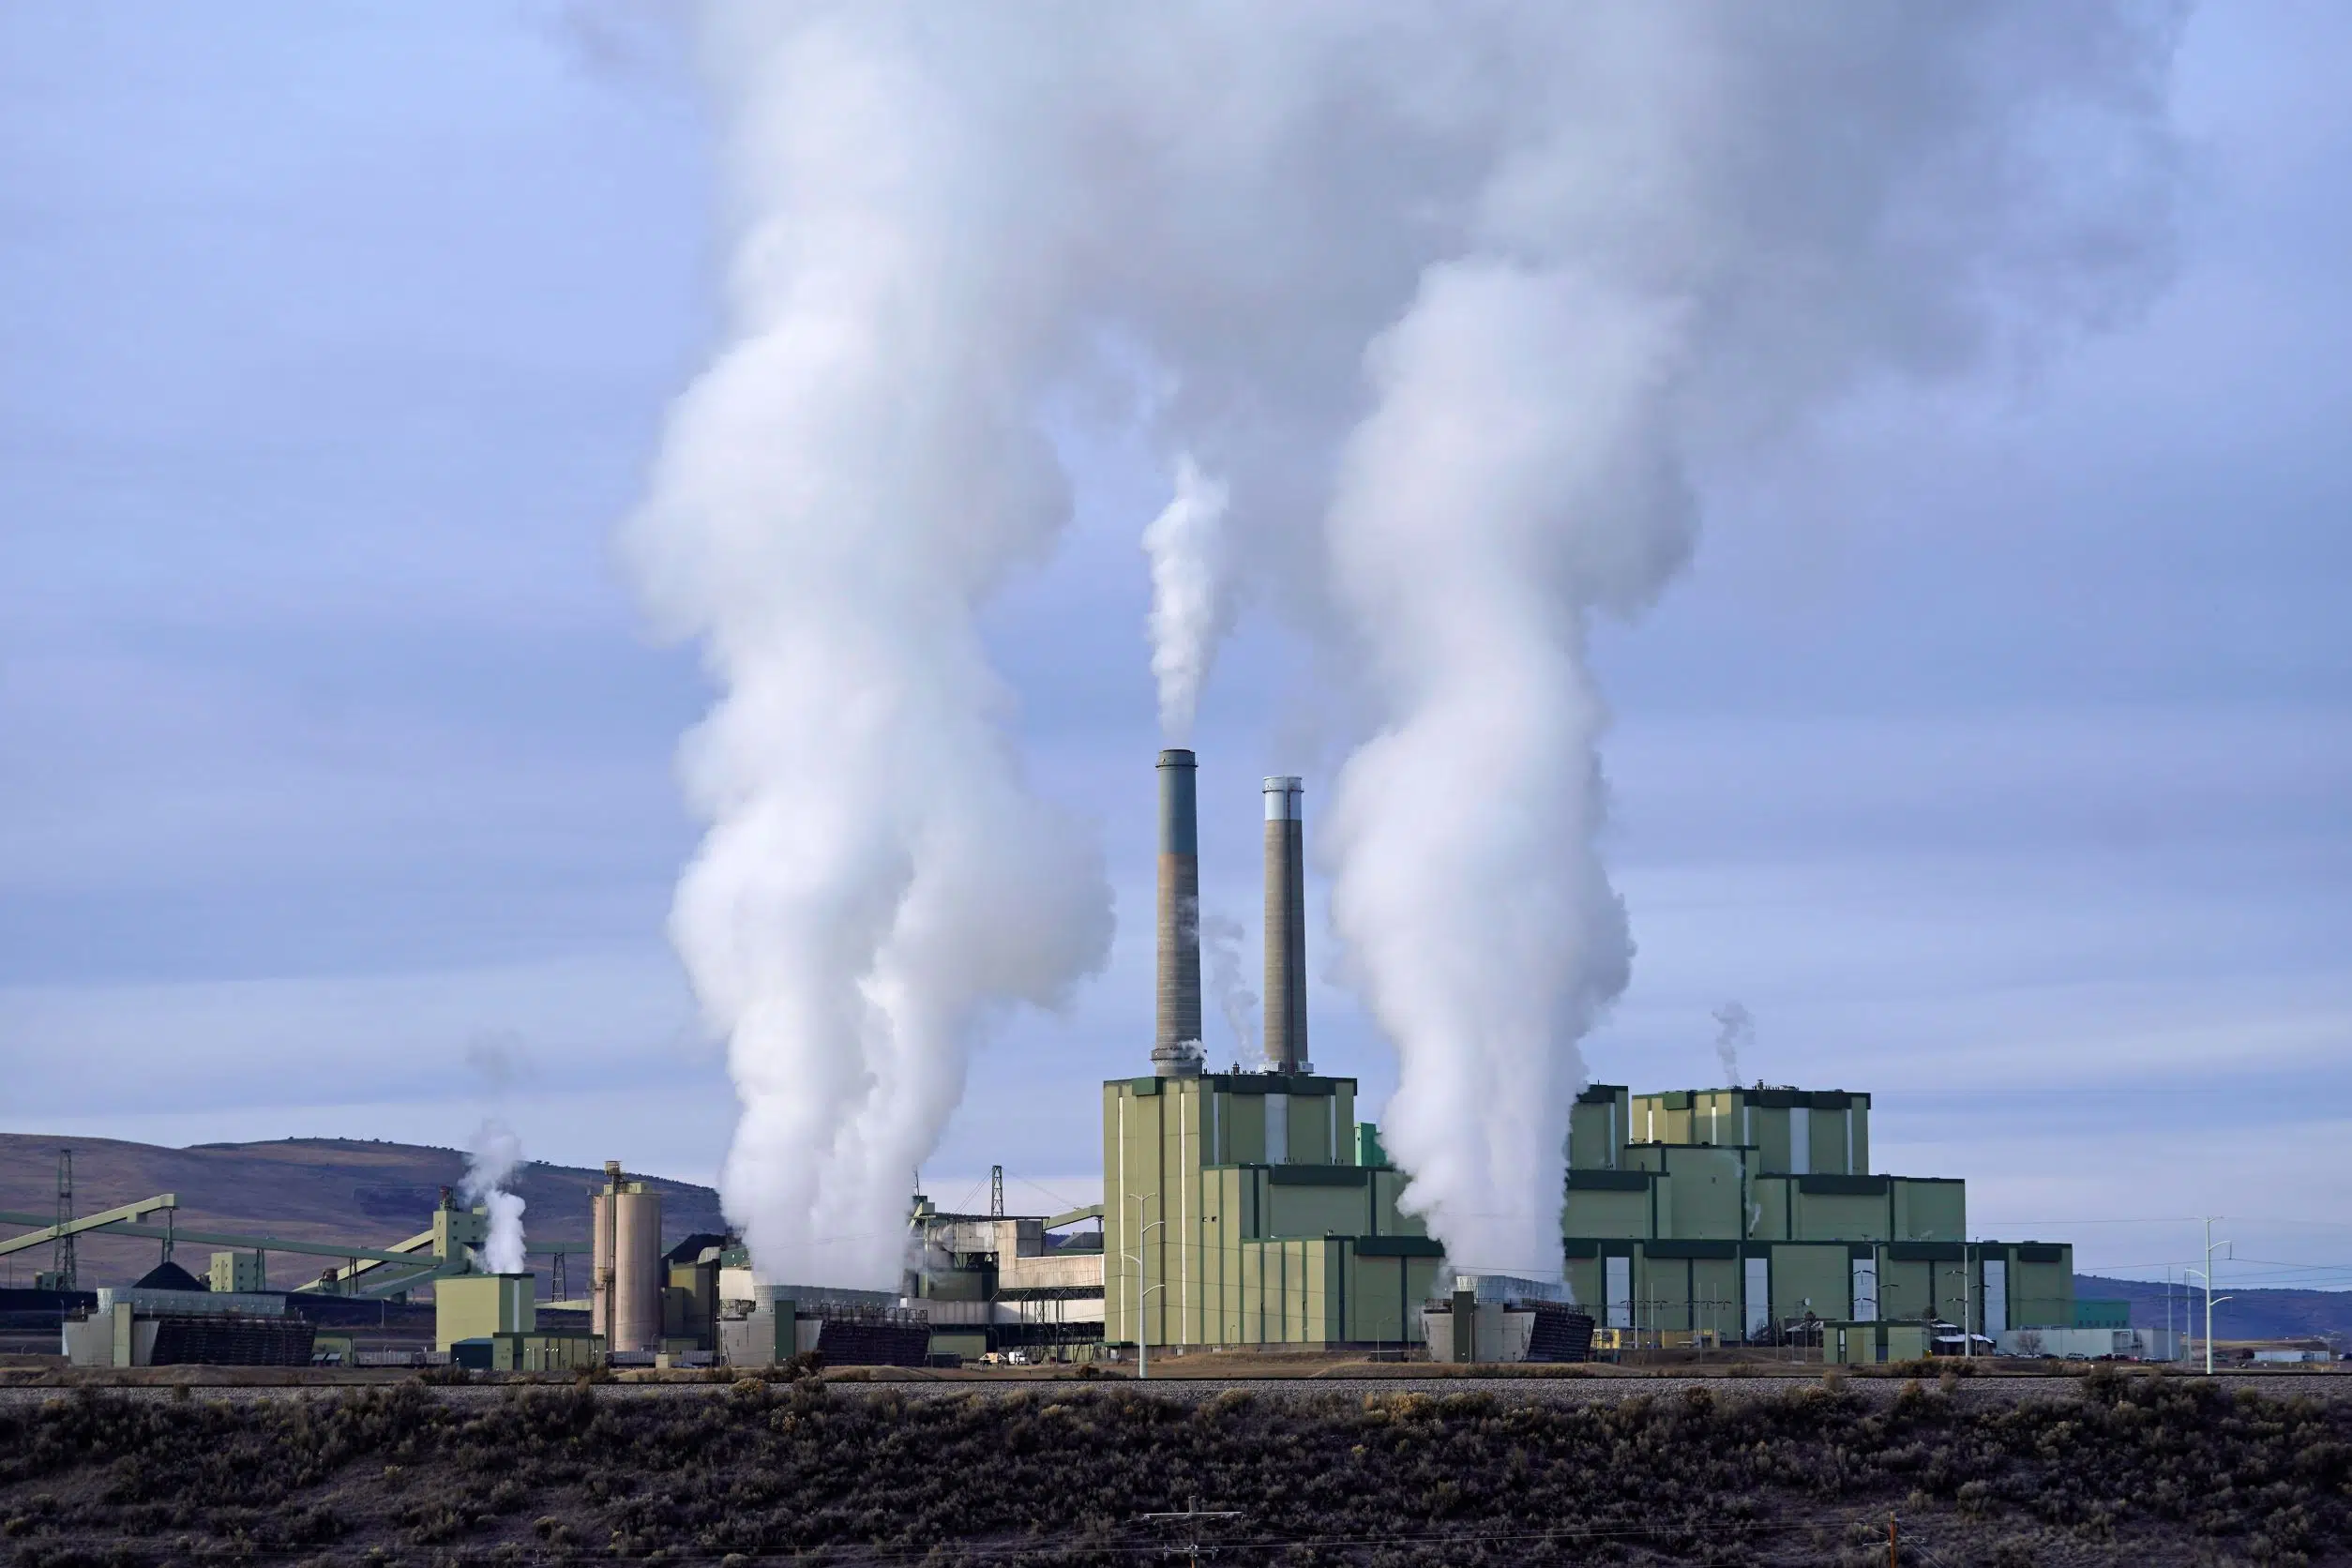 Supreme Court Limits EPA Authority to Regulate Power Plant Emissions